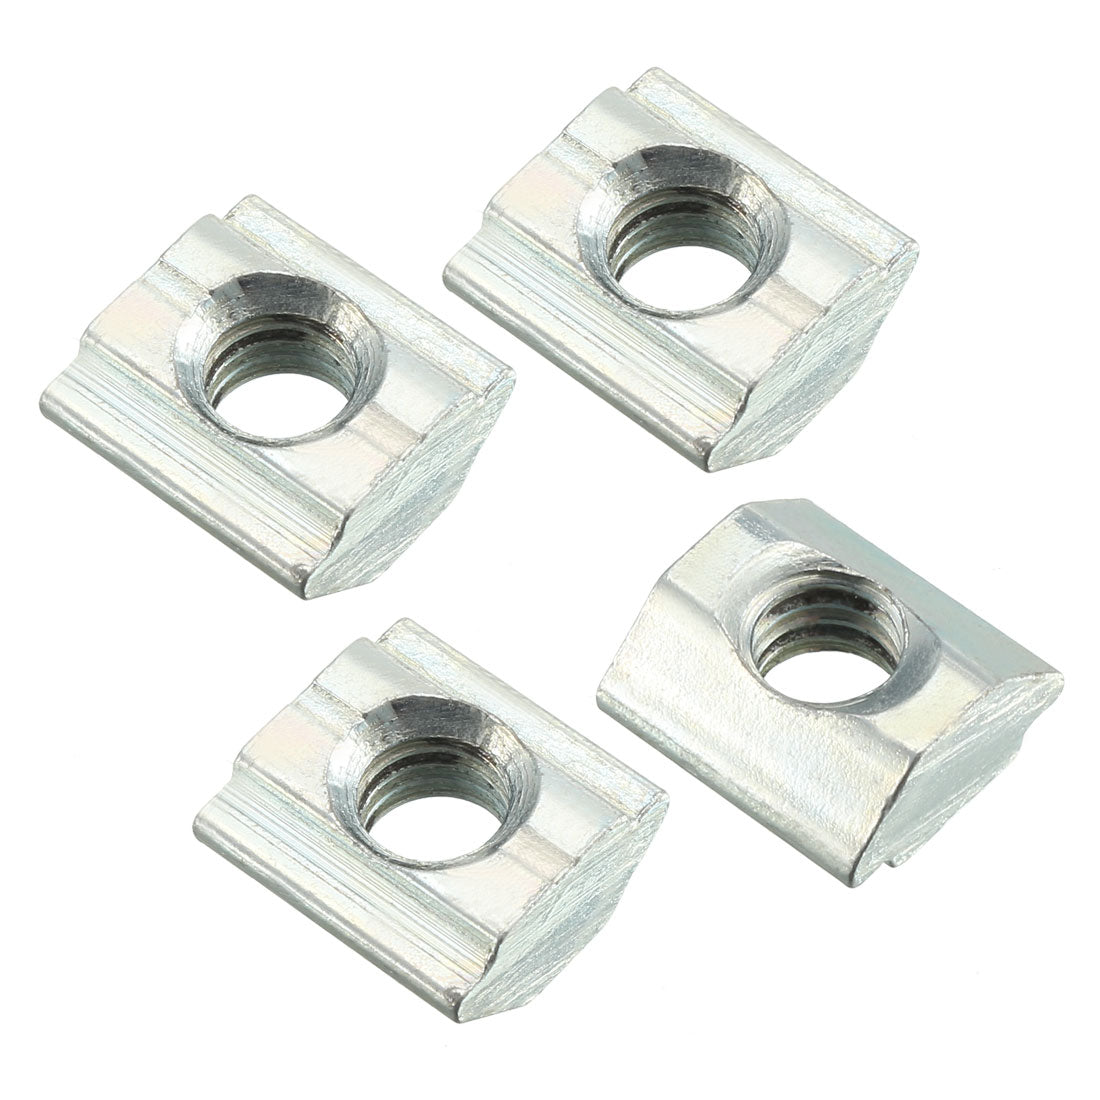 Uxcell Uxcell Slide in T-Nut, M4 Threaded for 2020 Series Aluminum Extrusions Profile 4pcs